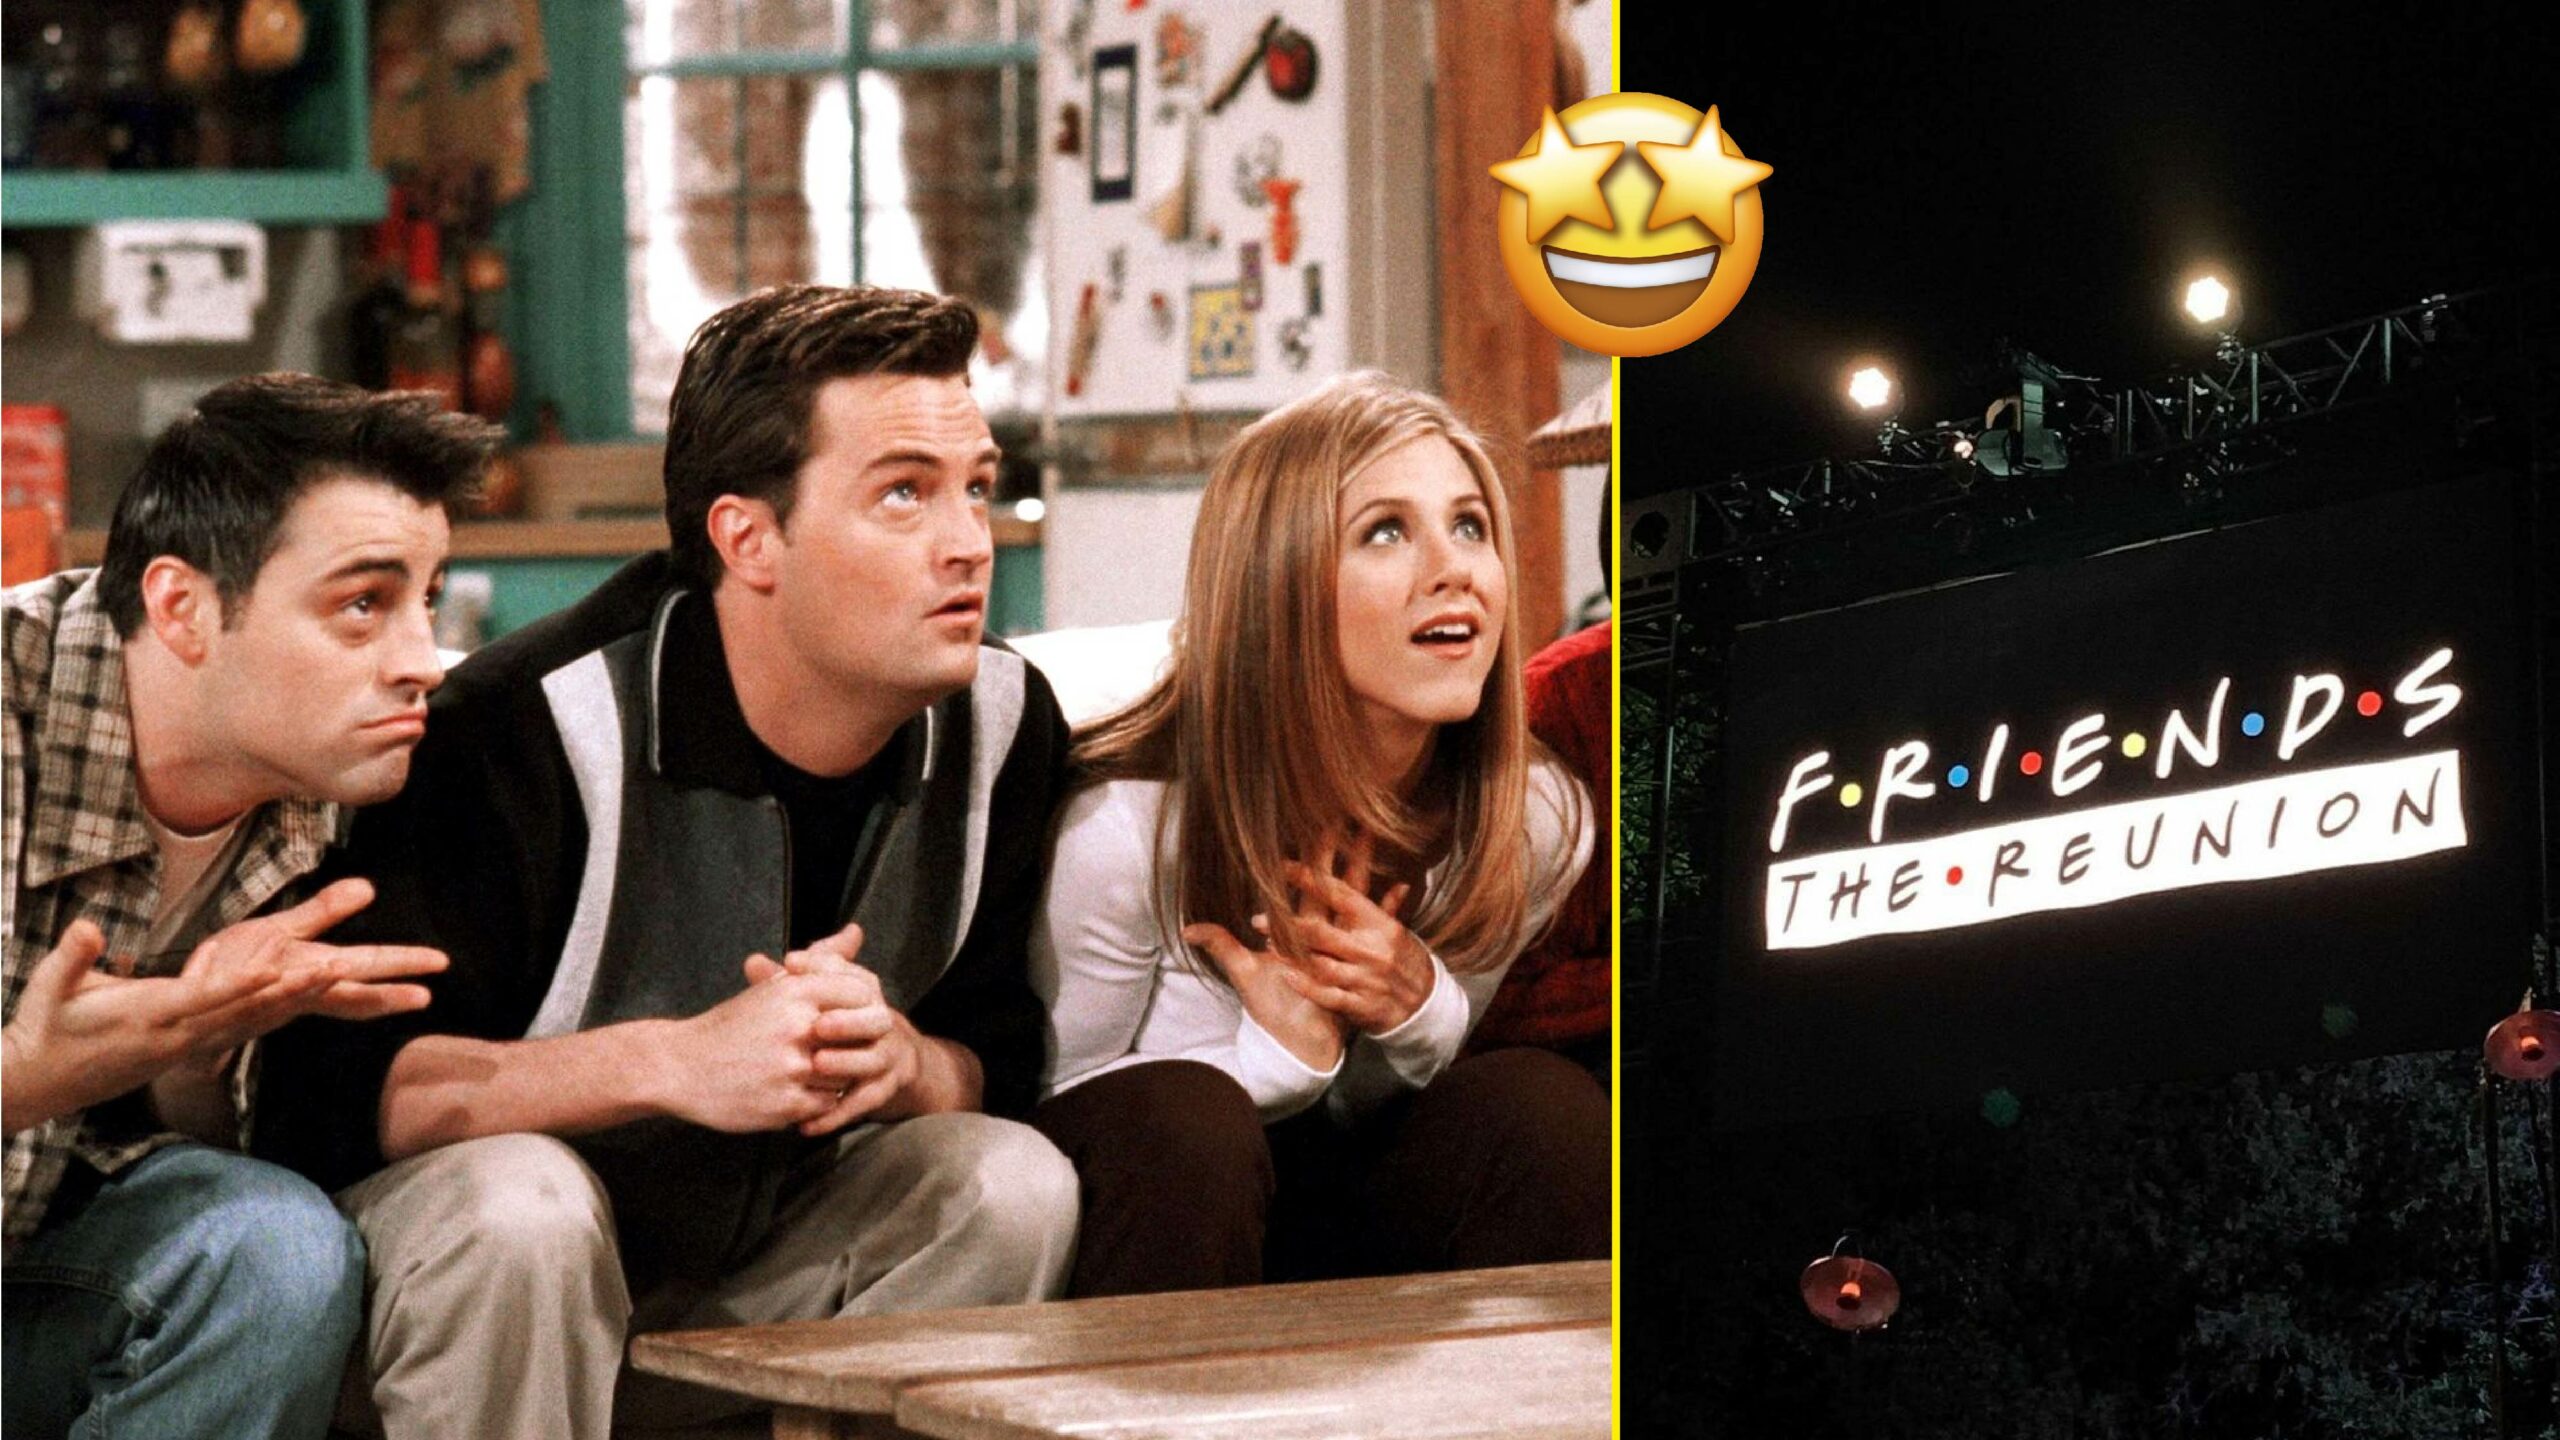 It's happening! FRIENDS reunion wraps up filming & hitting screens soon